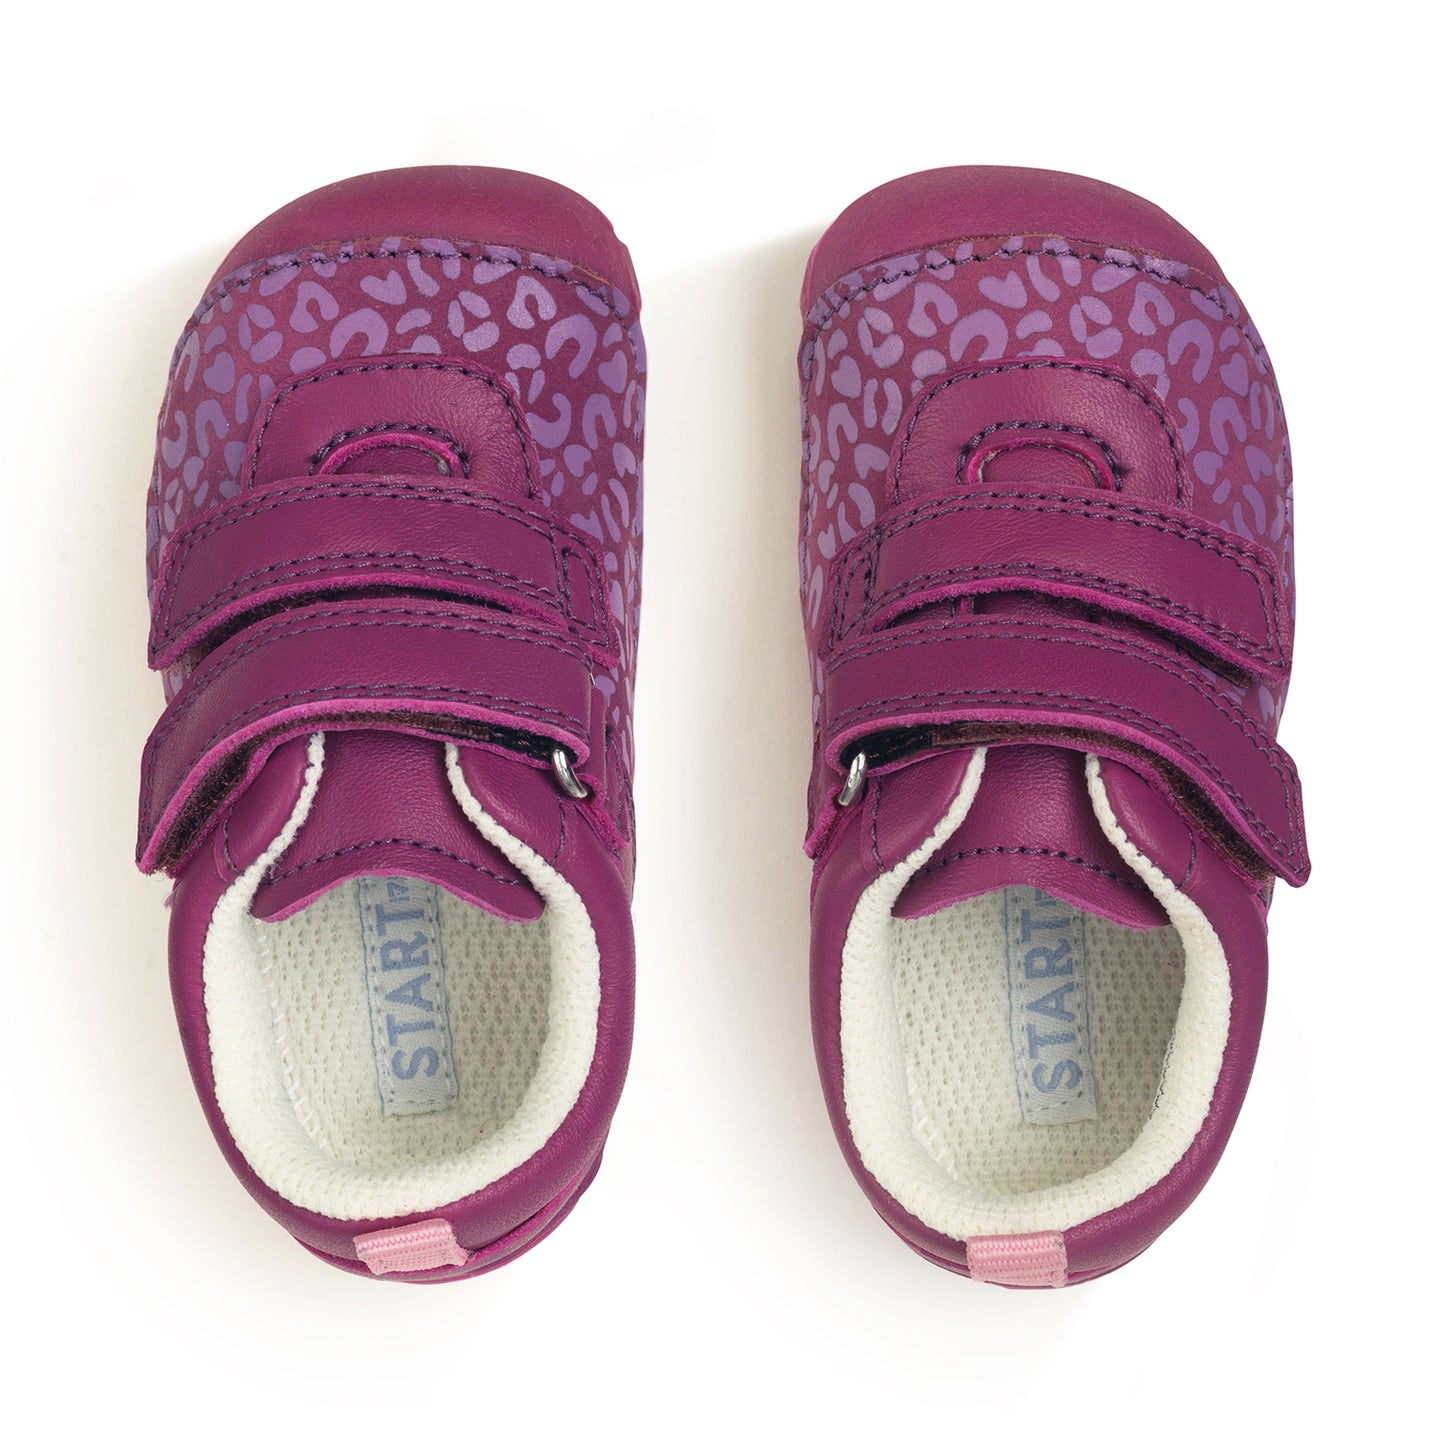 A pair of girls pre-walkers by Start-Rite, style Little Smile. In bright pink nubuck with leopard print detail. Double velcro fastening and toe bumper. Above view.